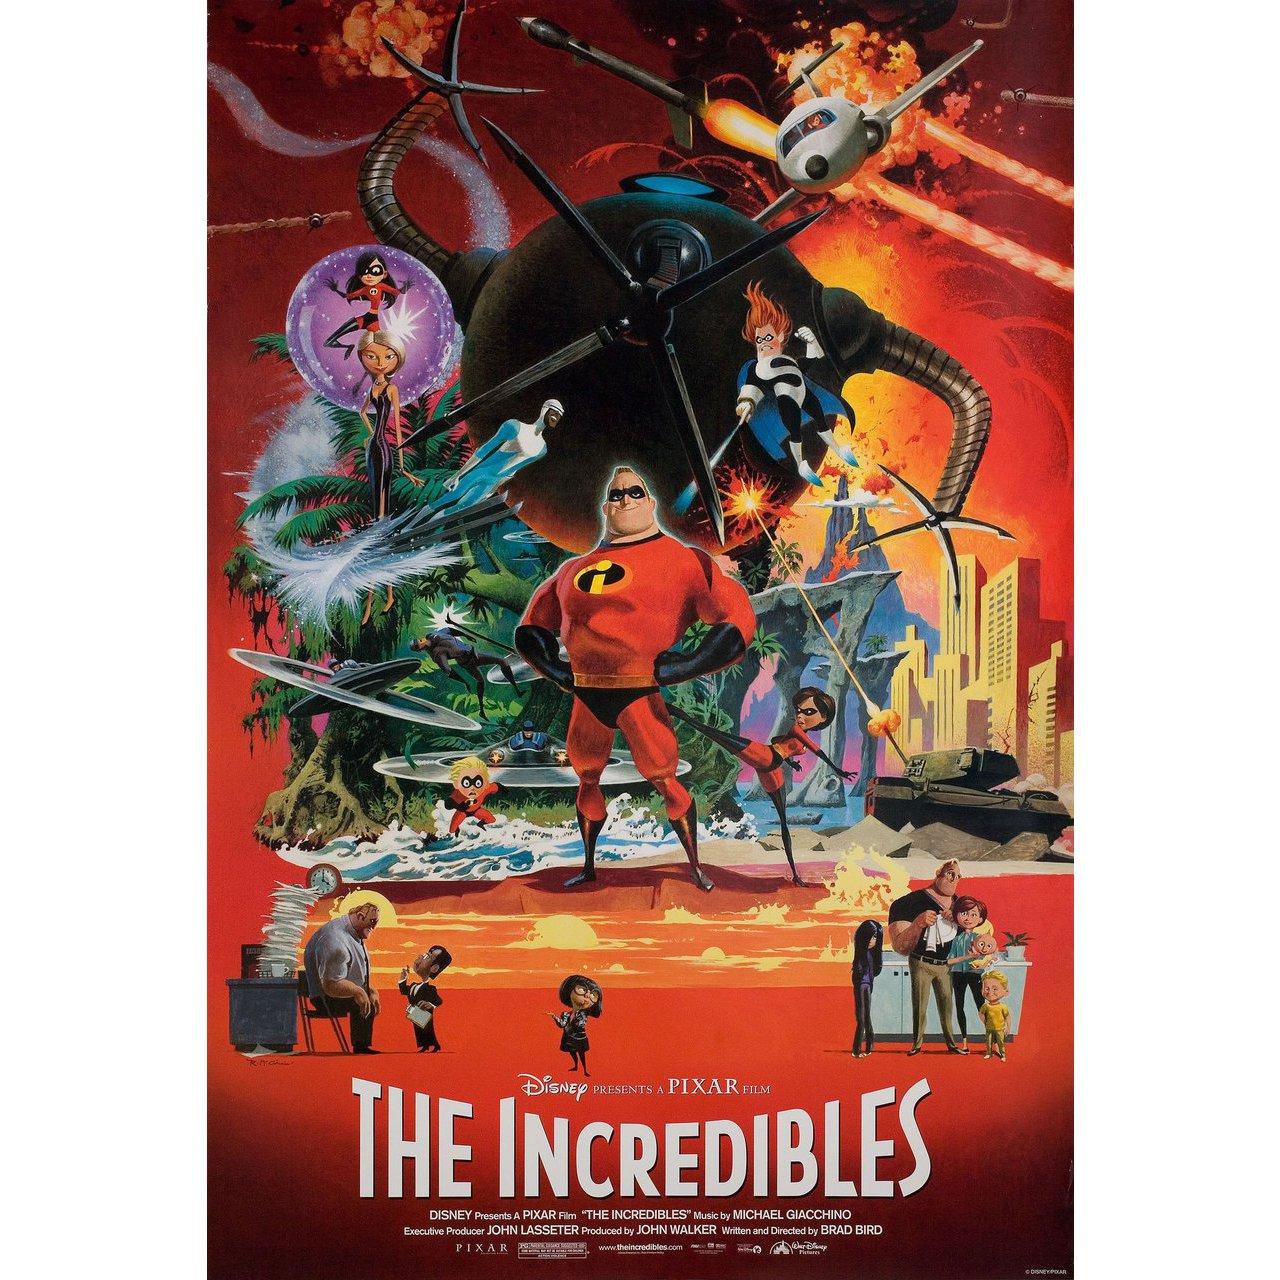 American The Incredibles 2004 U.S. One Sheet Film Poster